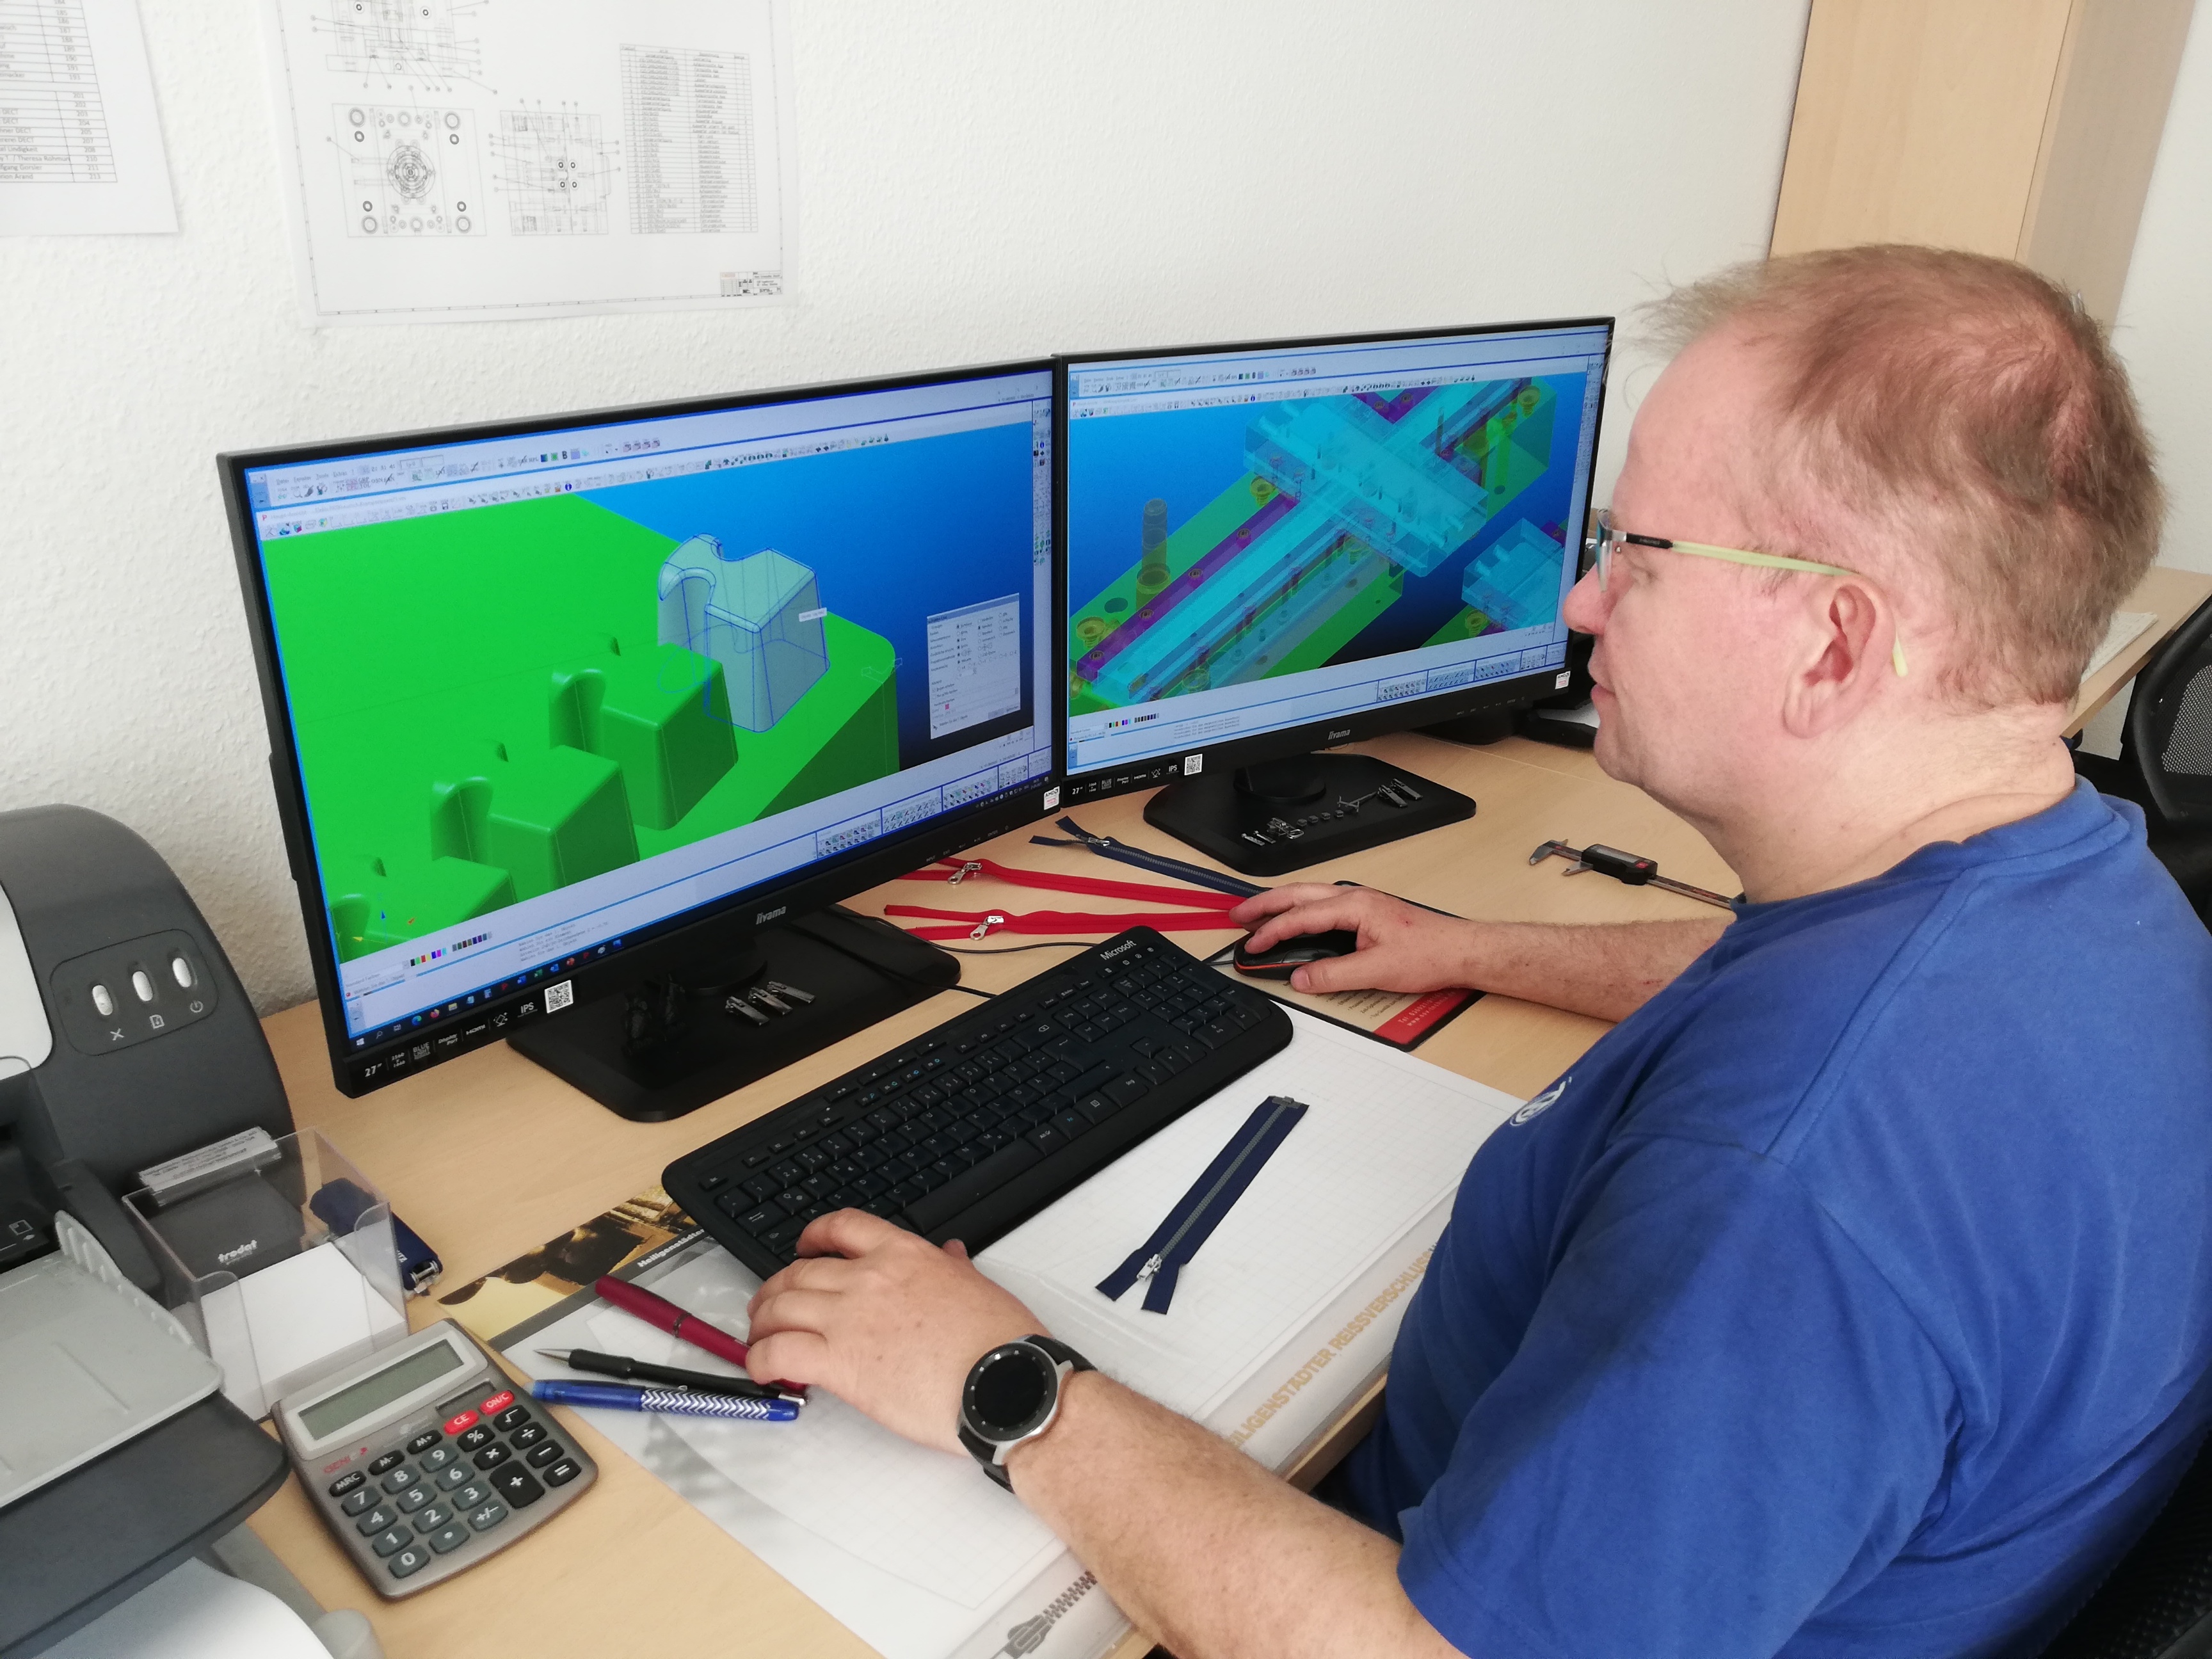 Mr. Bernd Kellner – PK0 Product Design and Development using Pictures by PC CAD/CAM Software